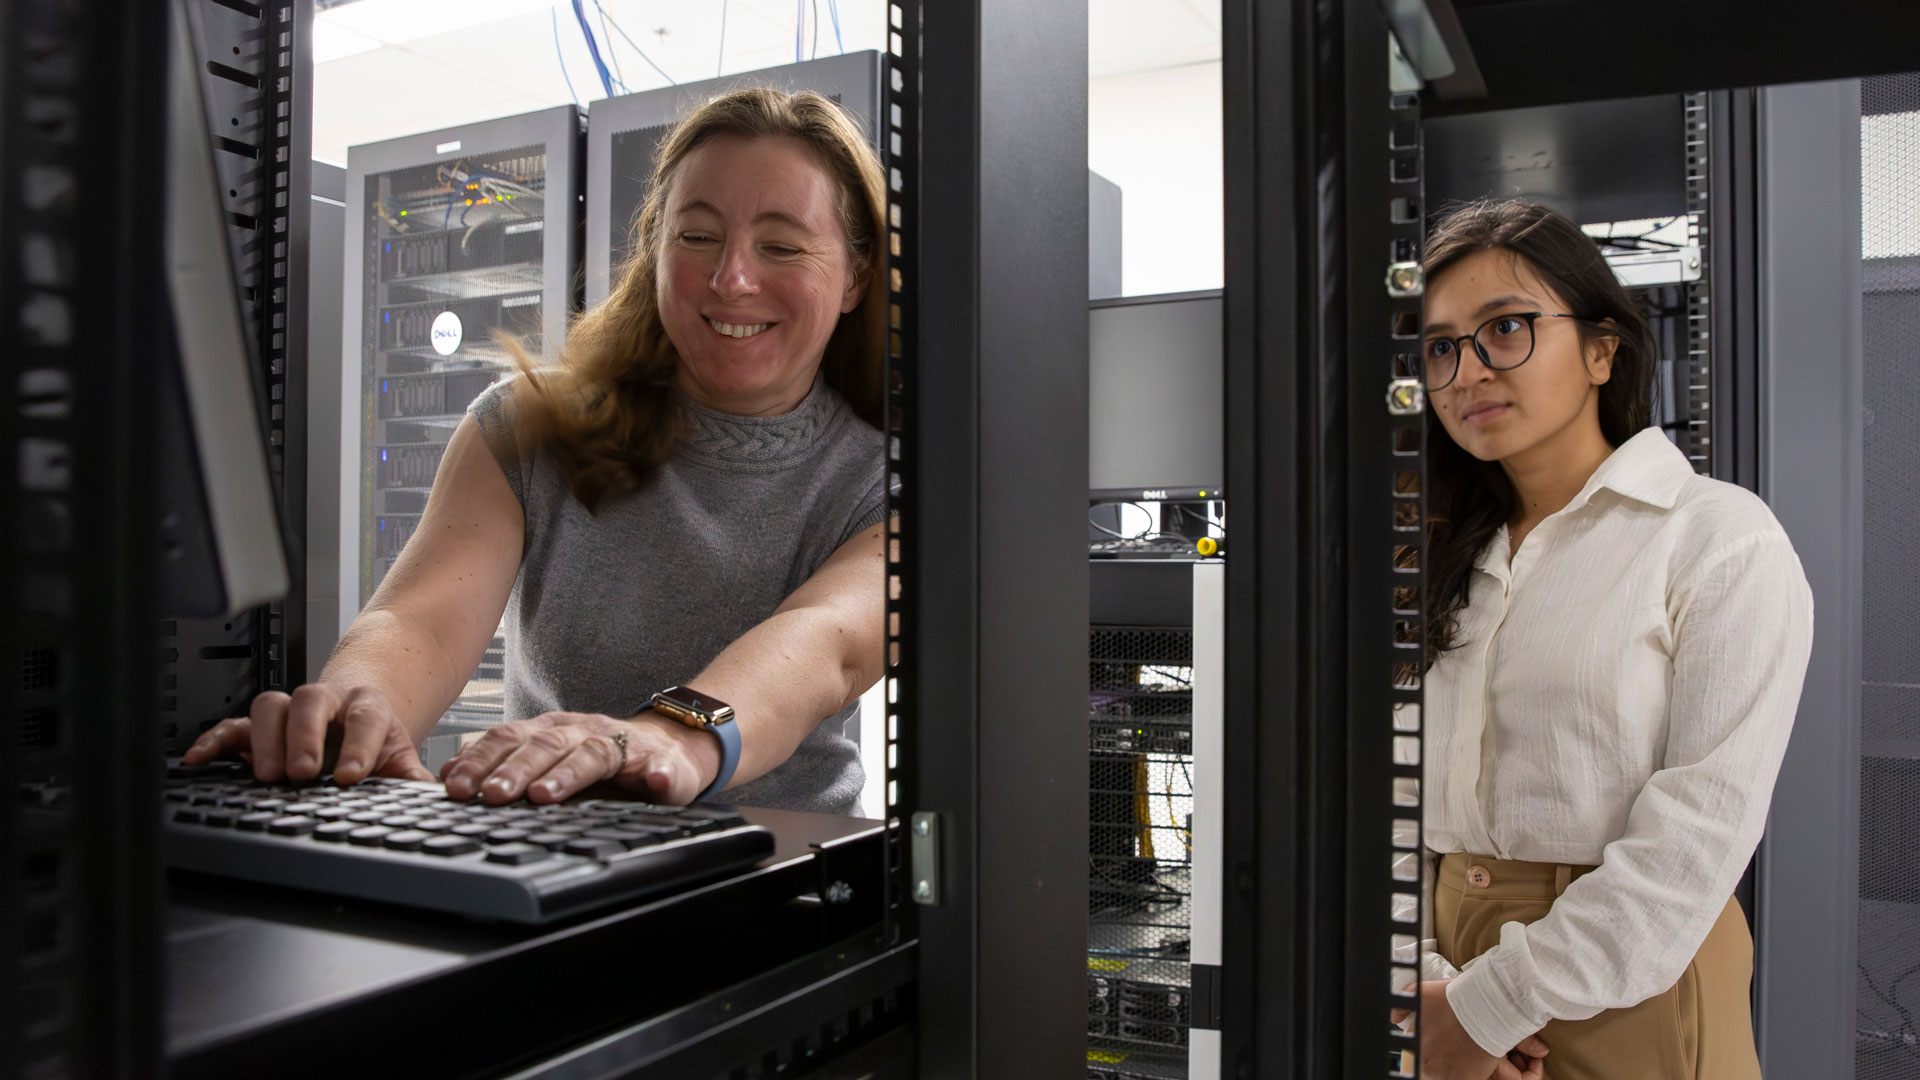 Arizona State University researcher Yulia Peet works with Anushka Subedi, a mechanical engineering doctoral student, in the university’s high-performance computing facilities. Peet leads a team of researchers from the University of California, Irvine and Brown University in a three-year, $2.25 million Air Force Office of Scientific Research project to study new uses of metamaterials for passive flow control in aerospace and defense applications. The project also seeks to develop a diverse workforce in the field. Photographer: Erika Gronek/ASU